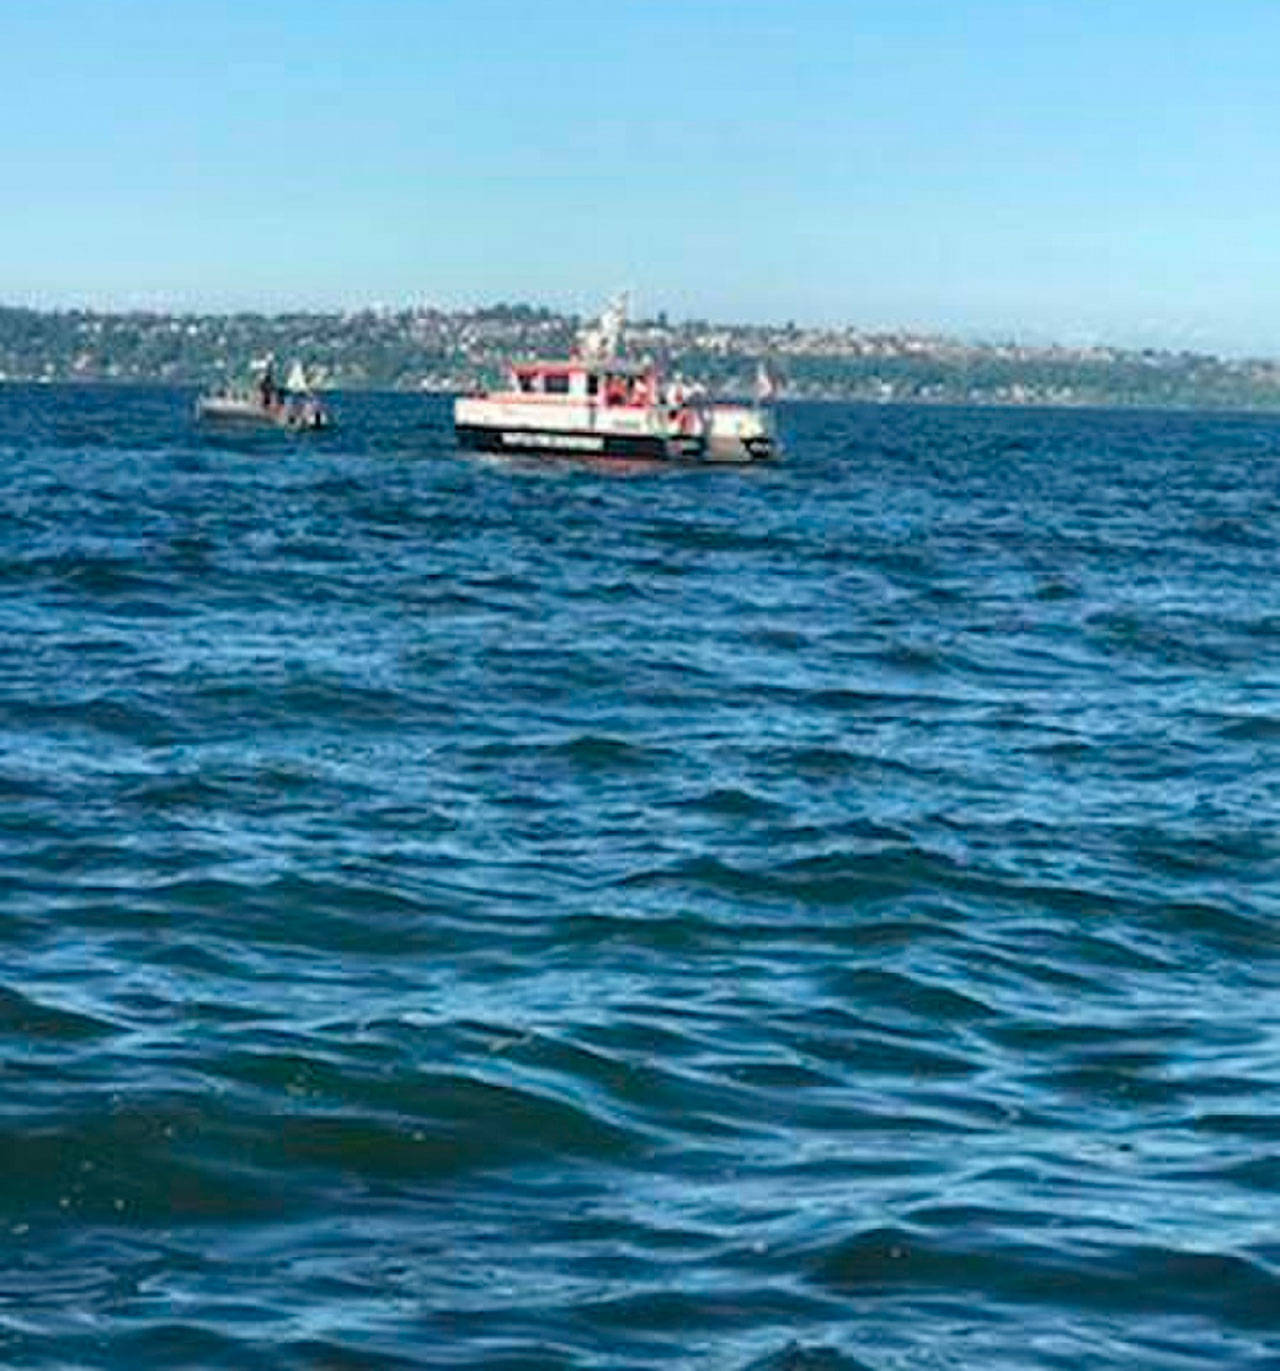 A Seattle Fire Department boat crew searches for a 70-year-old man who went missing after his plane crashed in the water off Bainbridge Island on May 27. (U.S. Coast Guard photo by Petty Officer 3rd Class Dustin Lay)